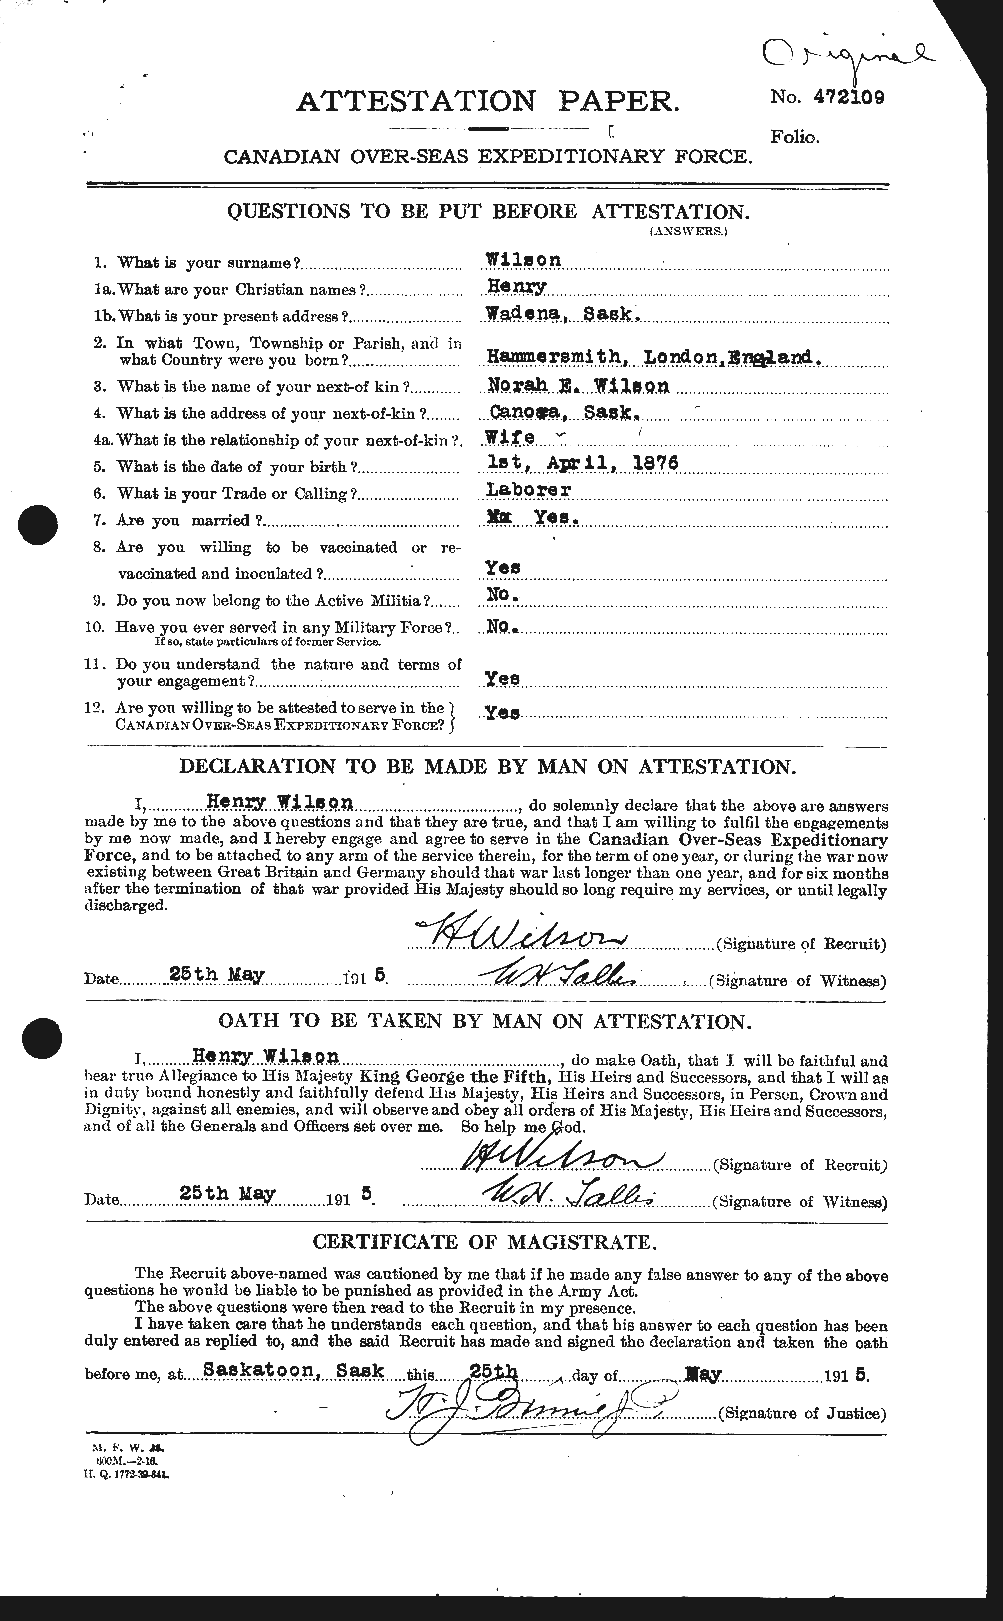 Personnel Records of the First World War - CEF 679494a